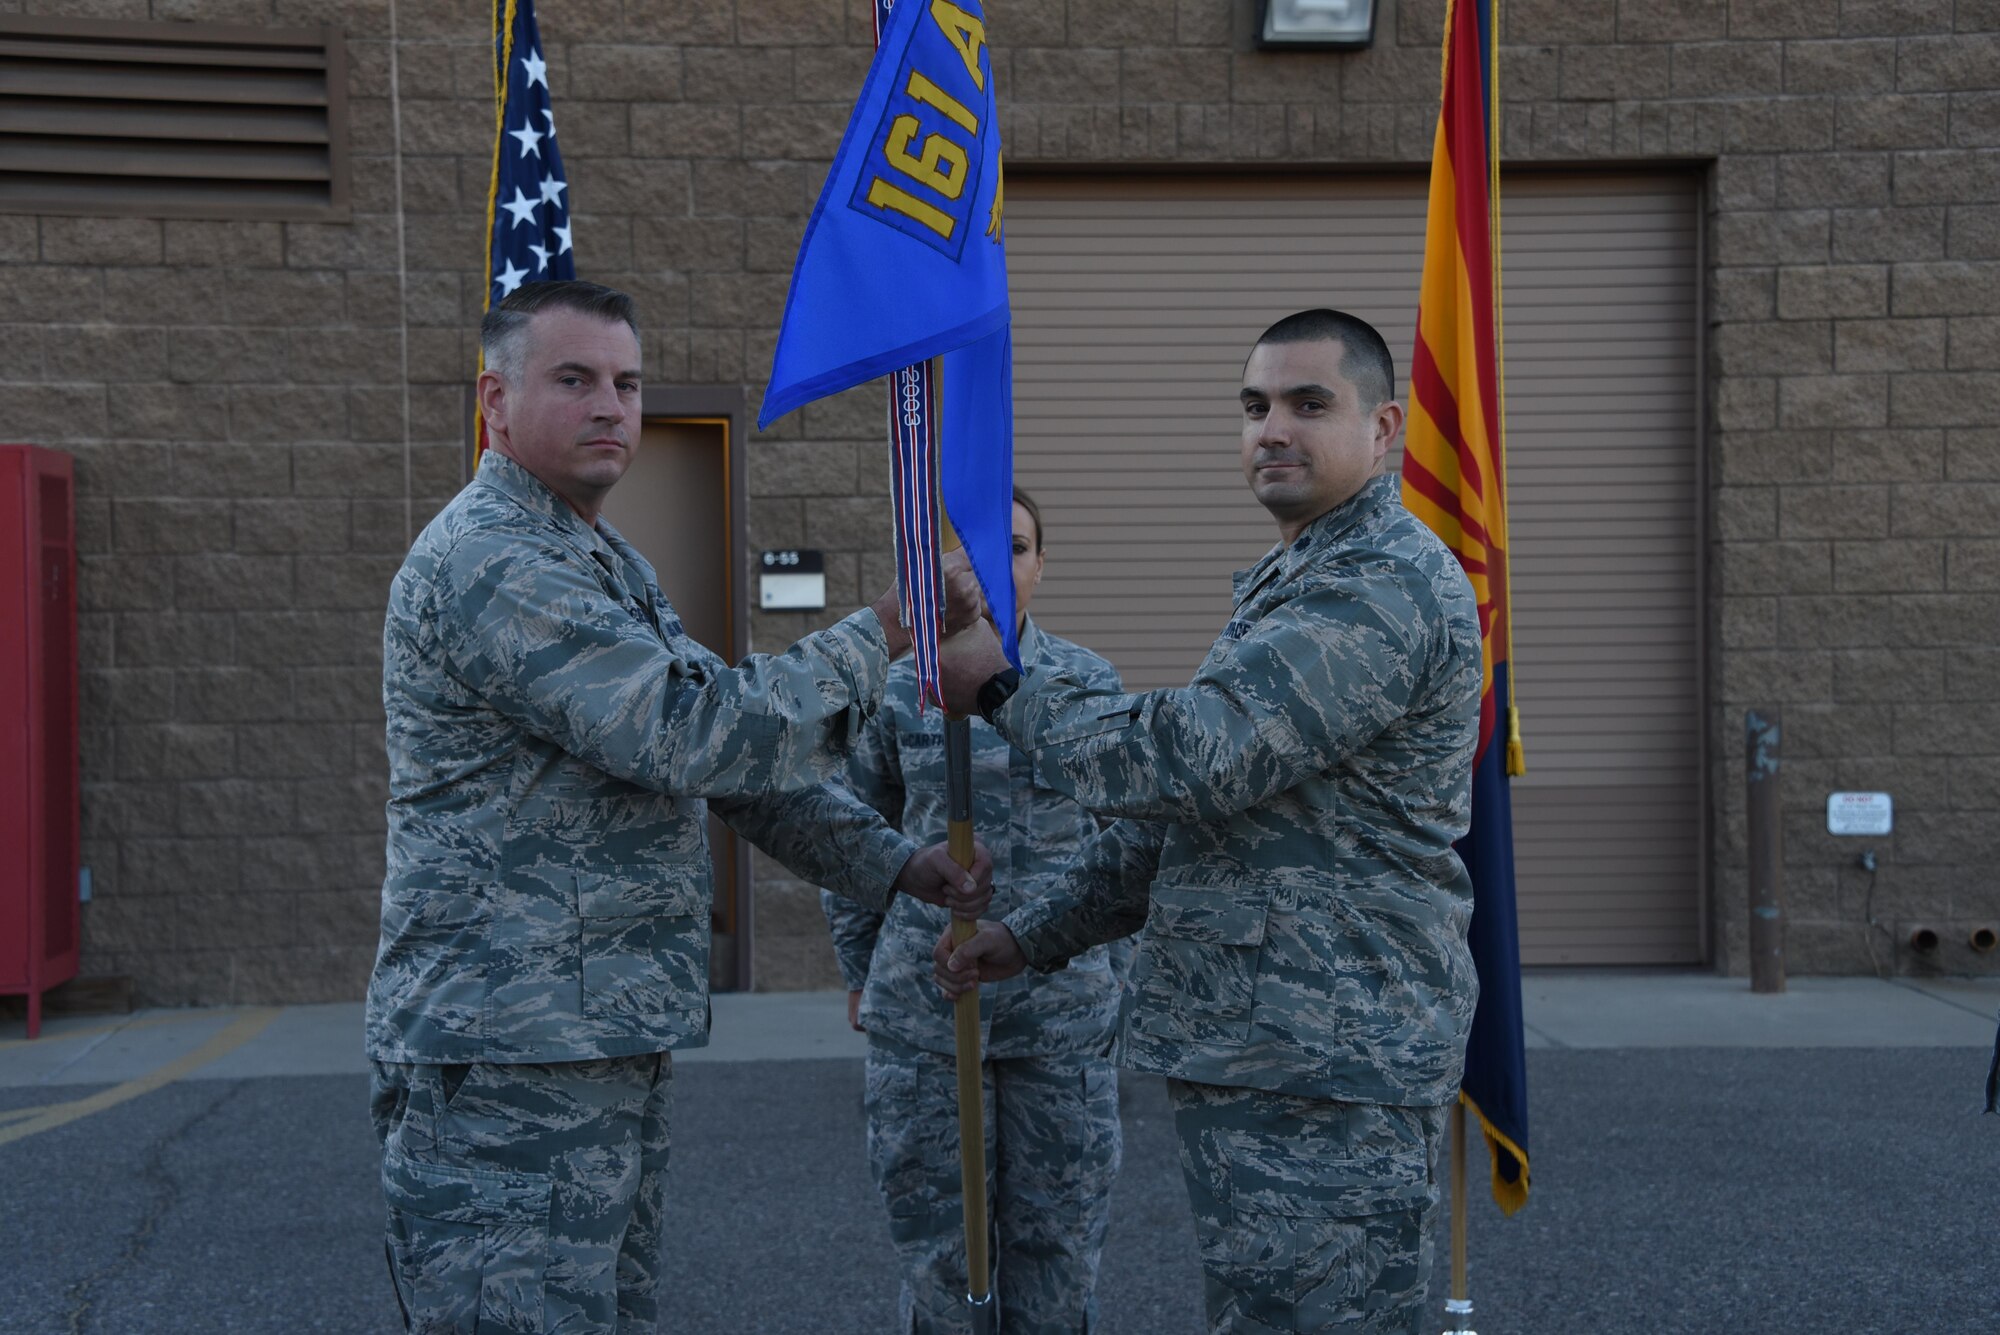 Col. David Ciesielski, 161st Air Refueling Wing Mission Support Group commander, passes the guidon to Lt. Col. Vince Navarro as he assumes command of the 161st Security Force Squadron, Oct. 7. (U.S. Air National Guard photo by 2nd Lt. Tinashe Machona).